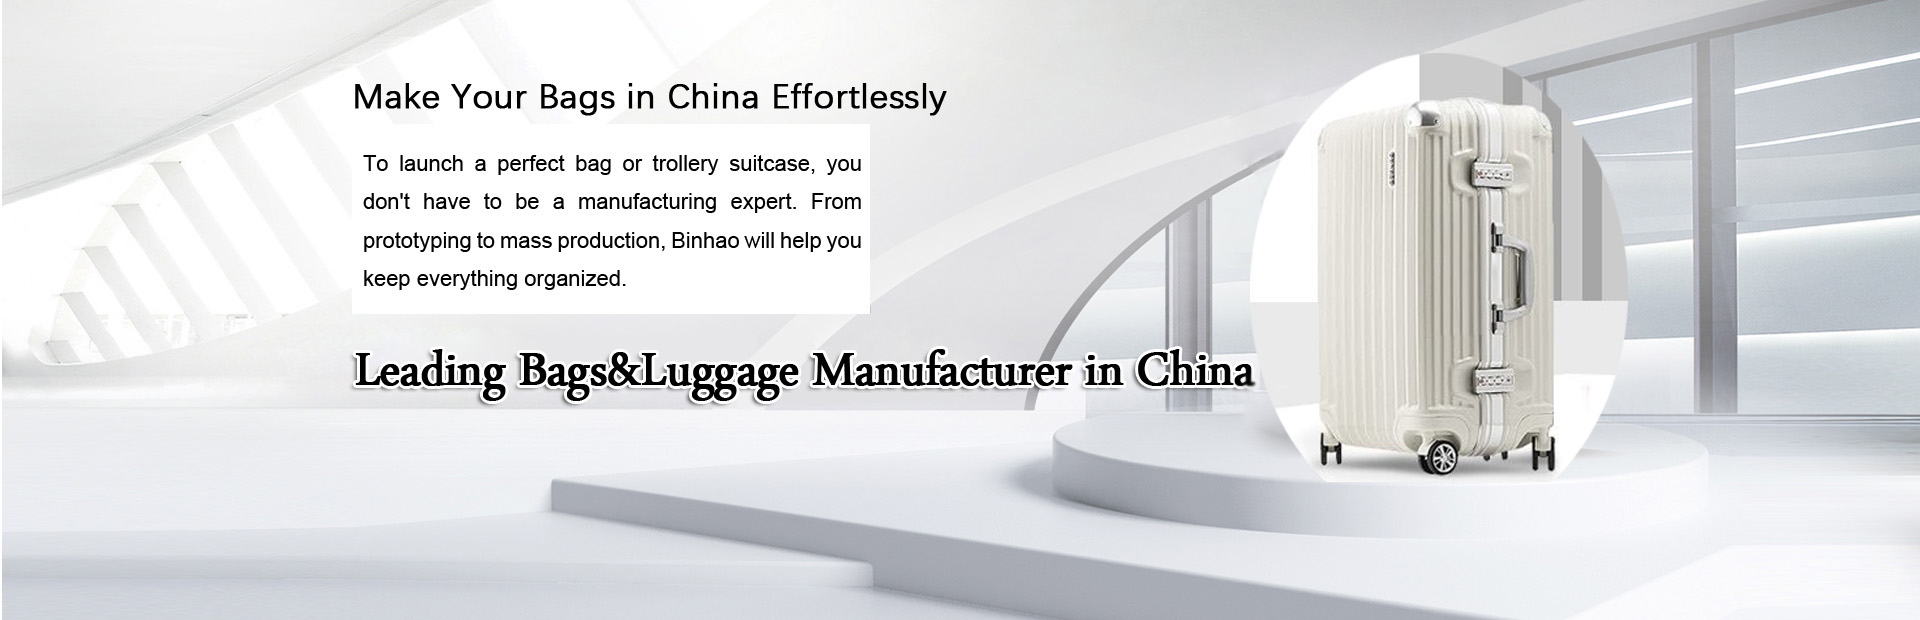 Binhao Luggage and Bags Factory02